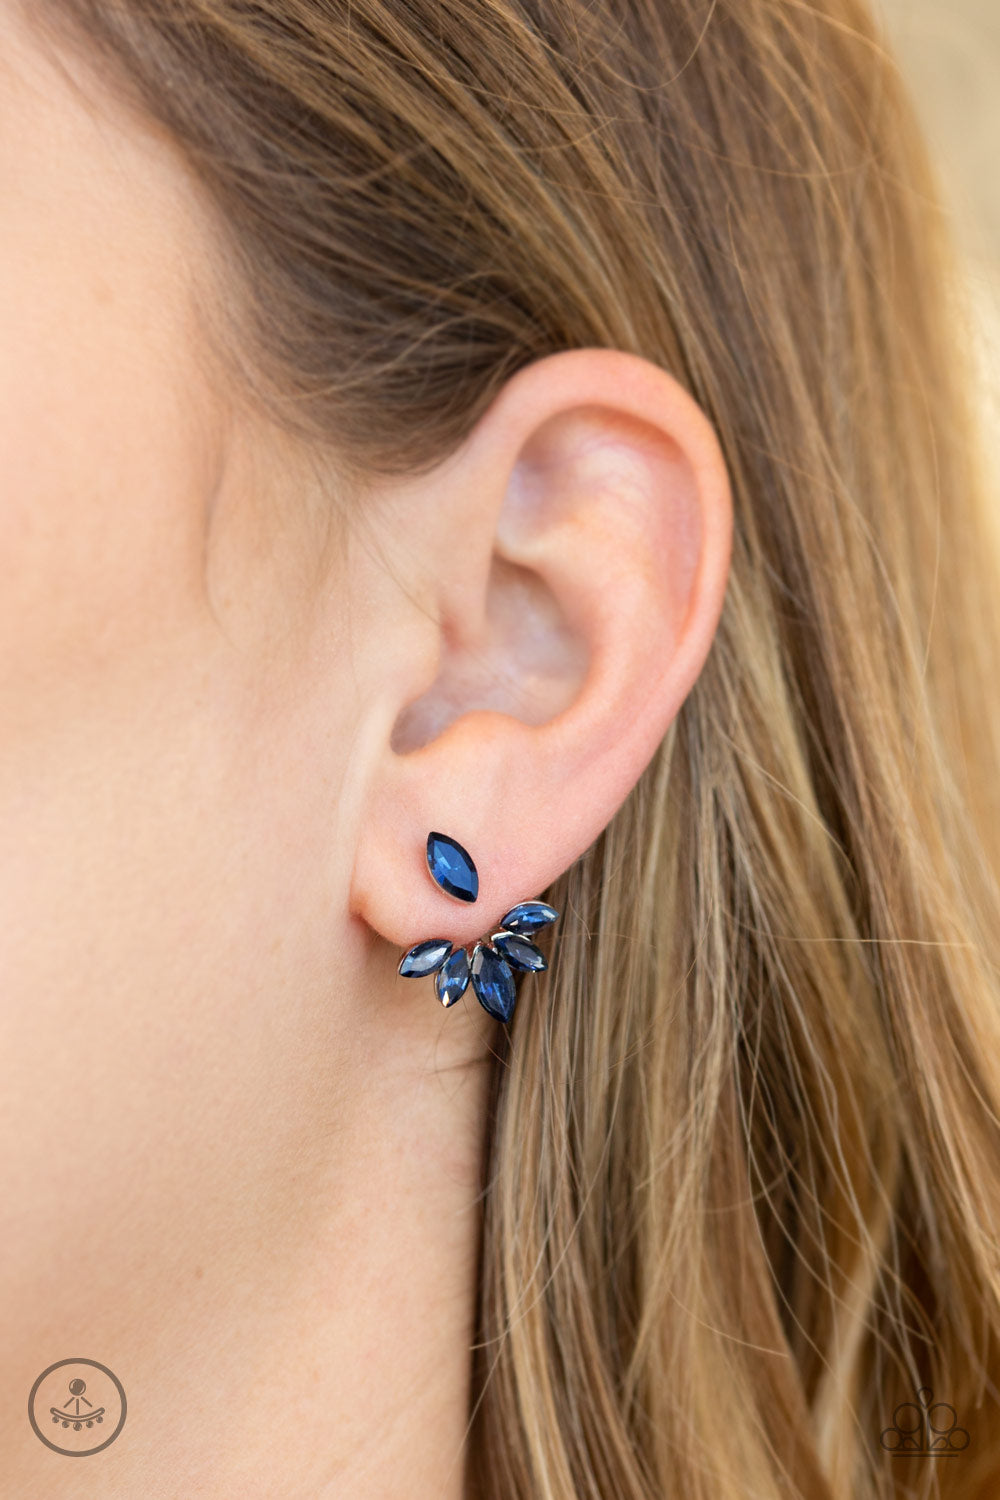 A solitaire blue marquise cut rhinestone attaches to a double-sided post, designed to fasten behind the ear. Encrusted in matching blue rhinestones, a double-sided post peeks out beneath the ear, creating a glittery fringe. Earring attaches to a standard post fitting.  Sold as one pair of post earrings.